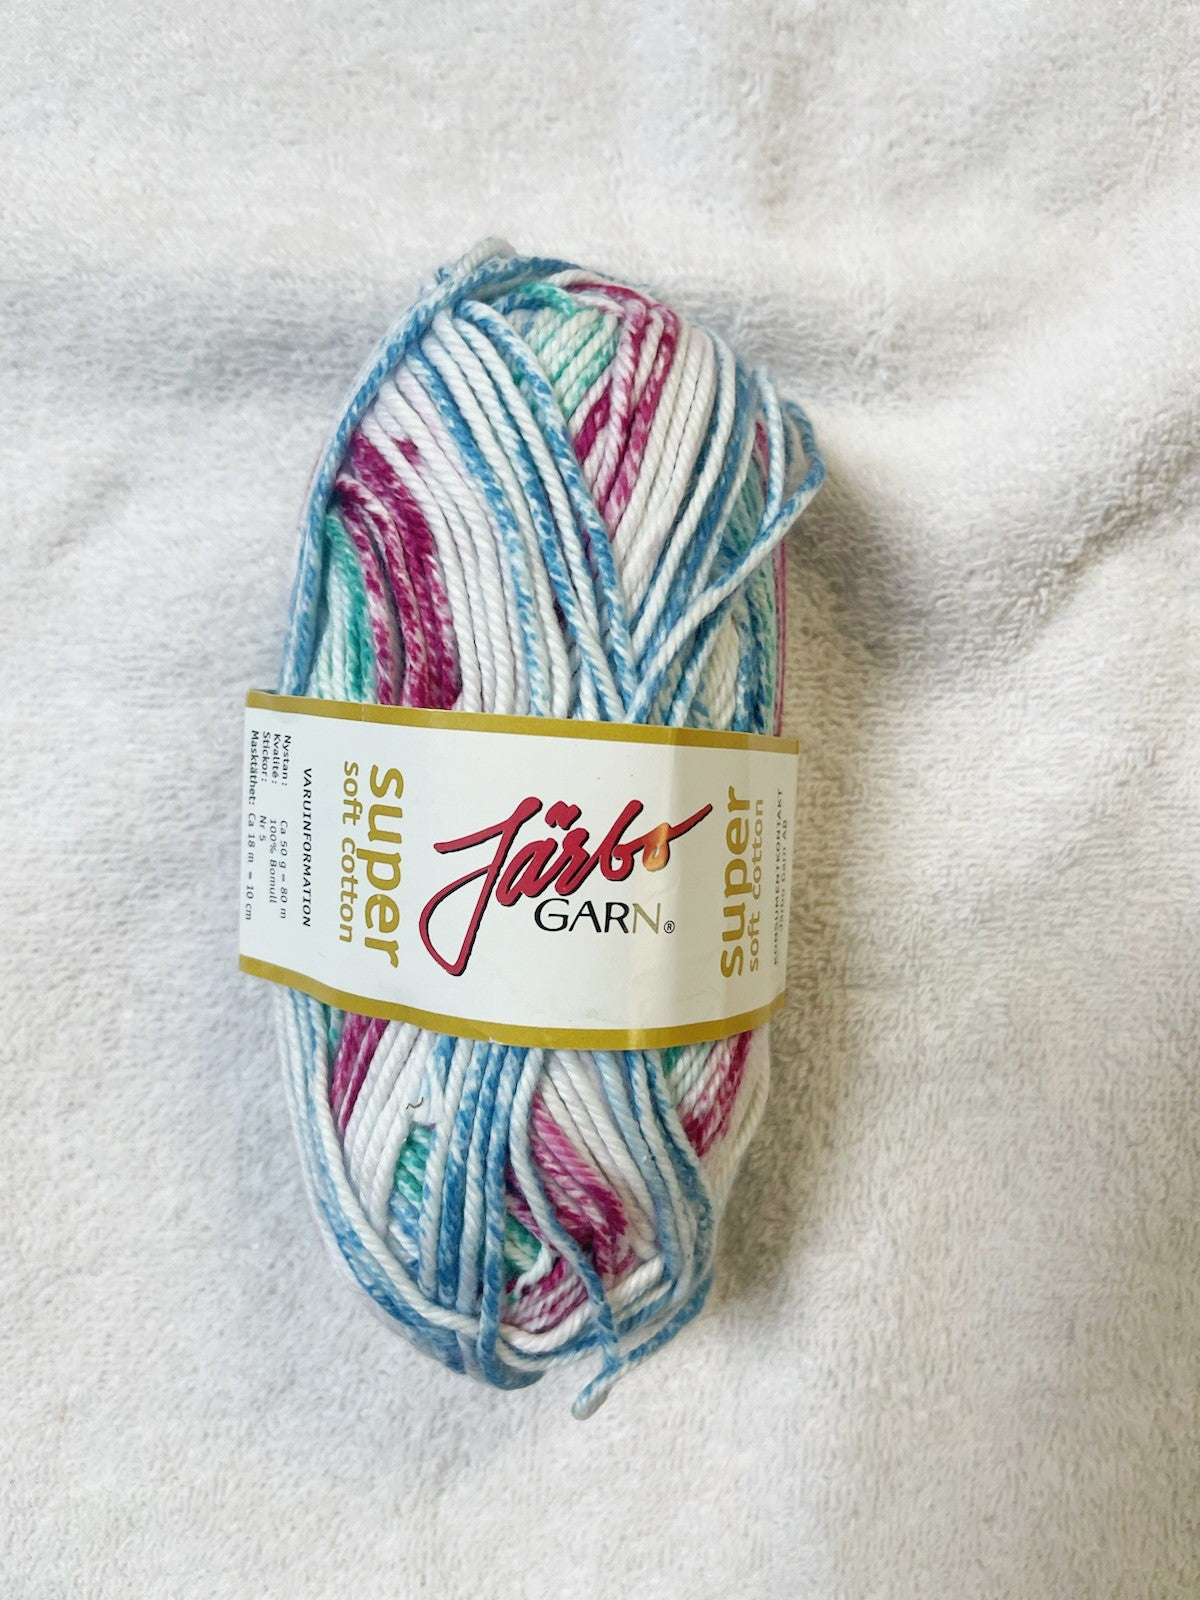 Cotton from Jarbo Garn – Knit Kreations